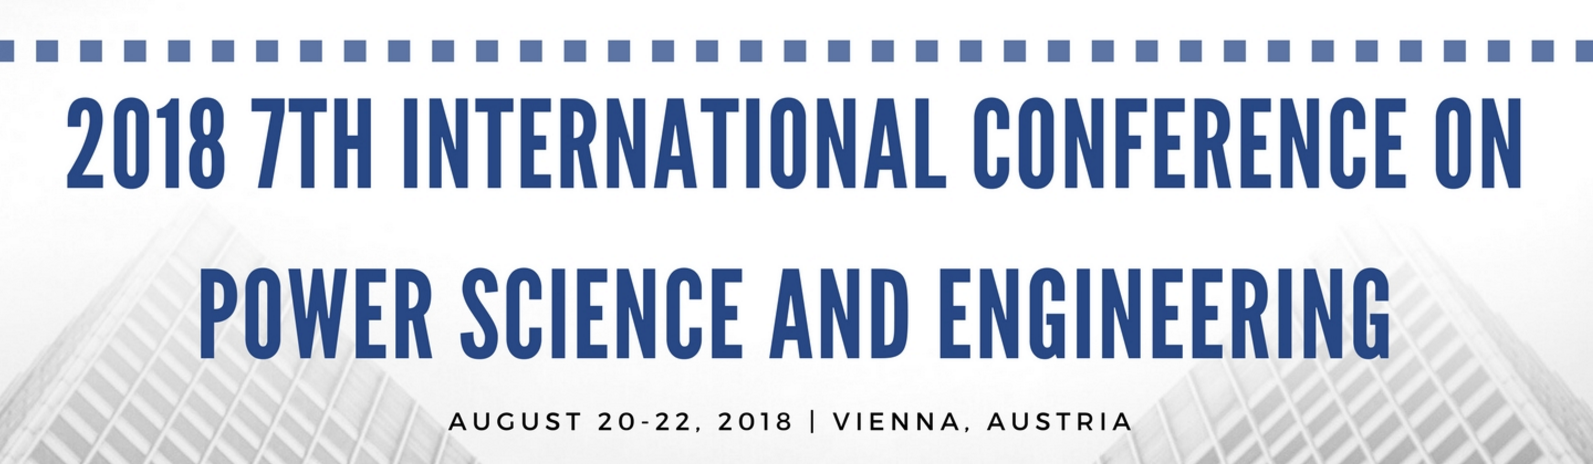 2018 7th International Conference on Power Science and Engineering (ICPSE 2018), Vienna, Austria